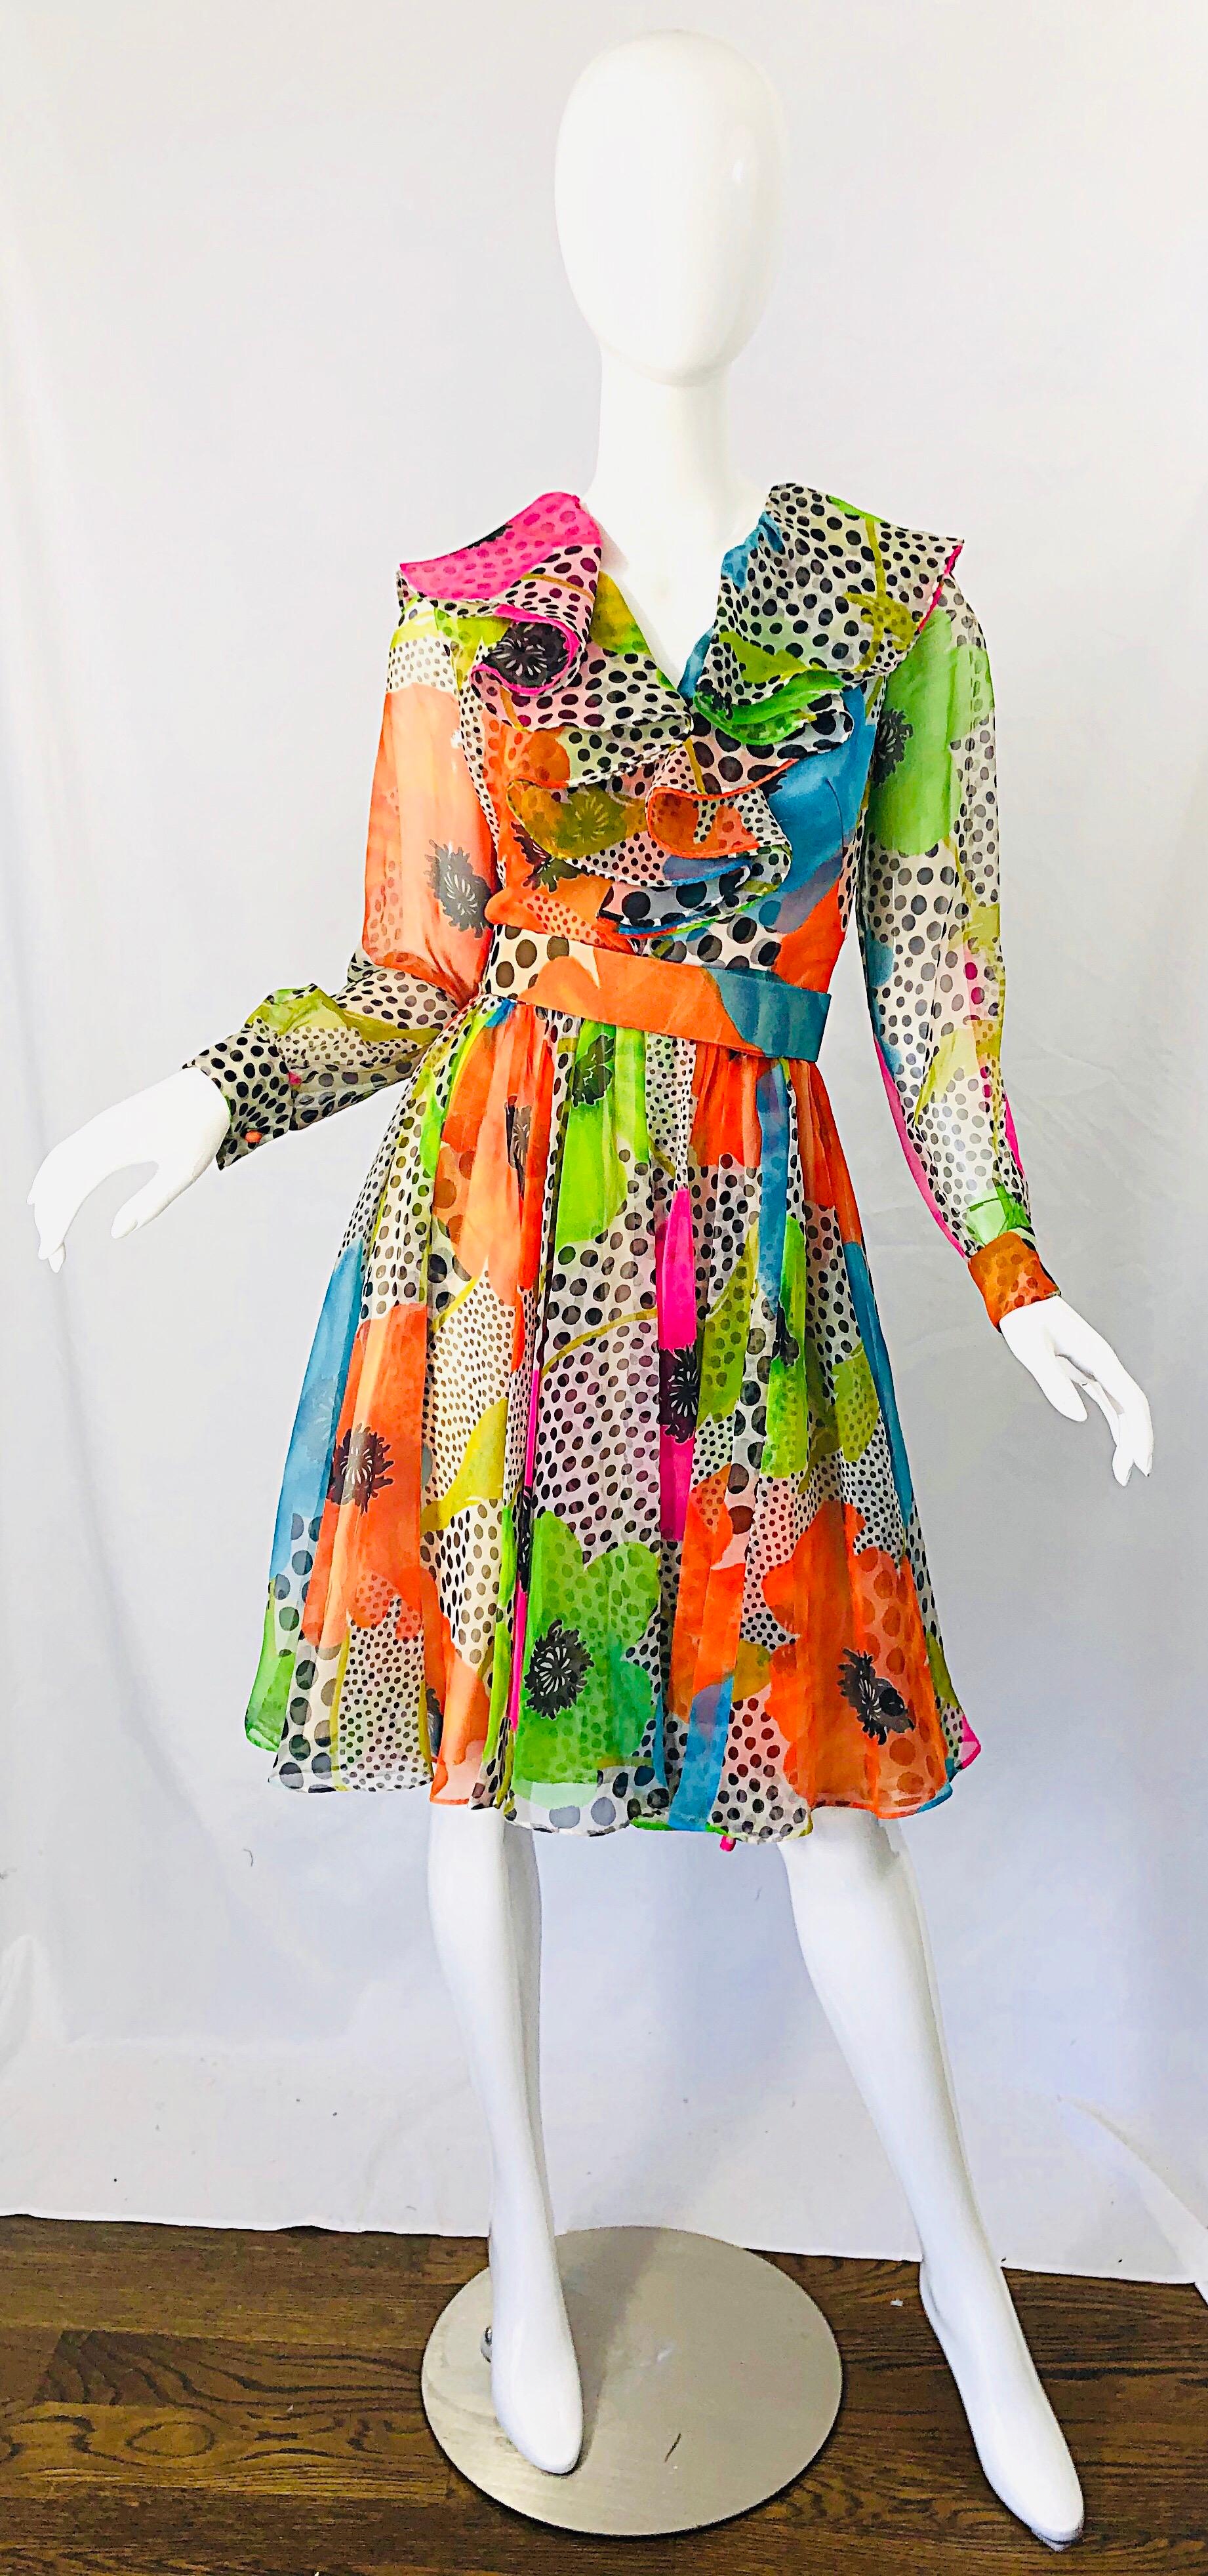 Chic and fun 1970s neon colored flowers and polka dots printed chiffon belted dress ! Features flowers in bright colors of blue, pink, green, and orange throughout. Semi sheer sleeves. Detachable matching belt. Full metal zipper up the back with